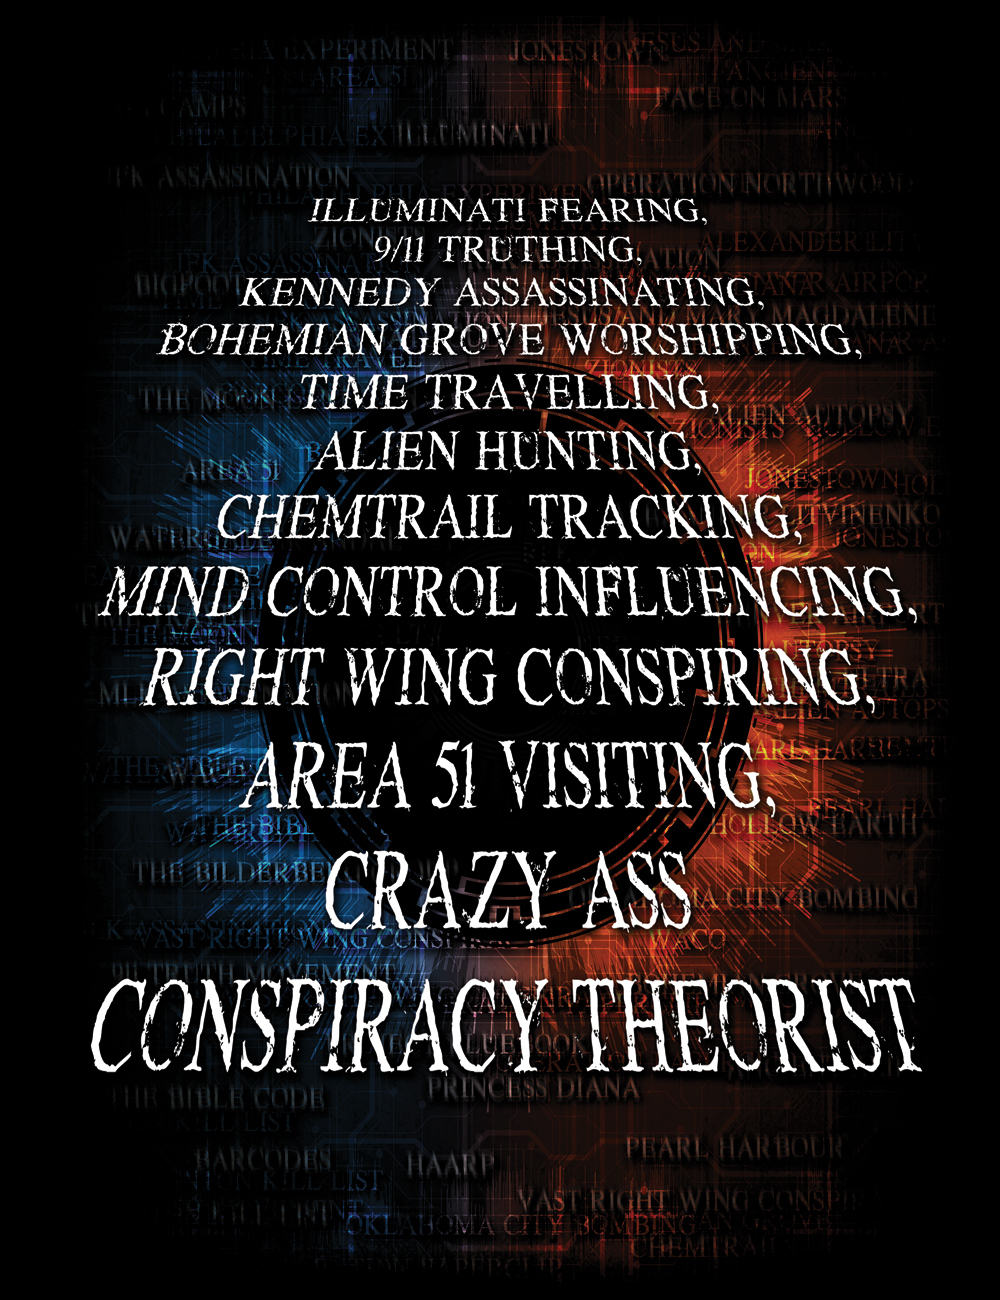 Conspiracy Theorist T-Shirt - Hellwood Outfitters